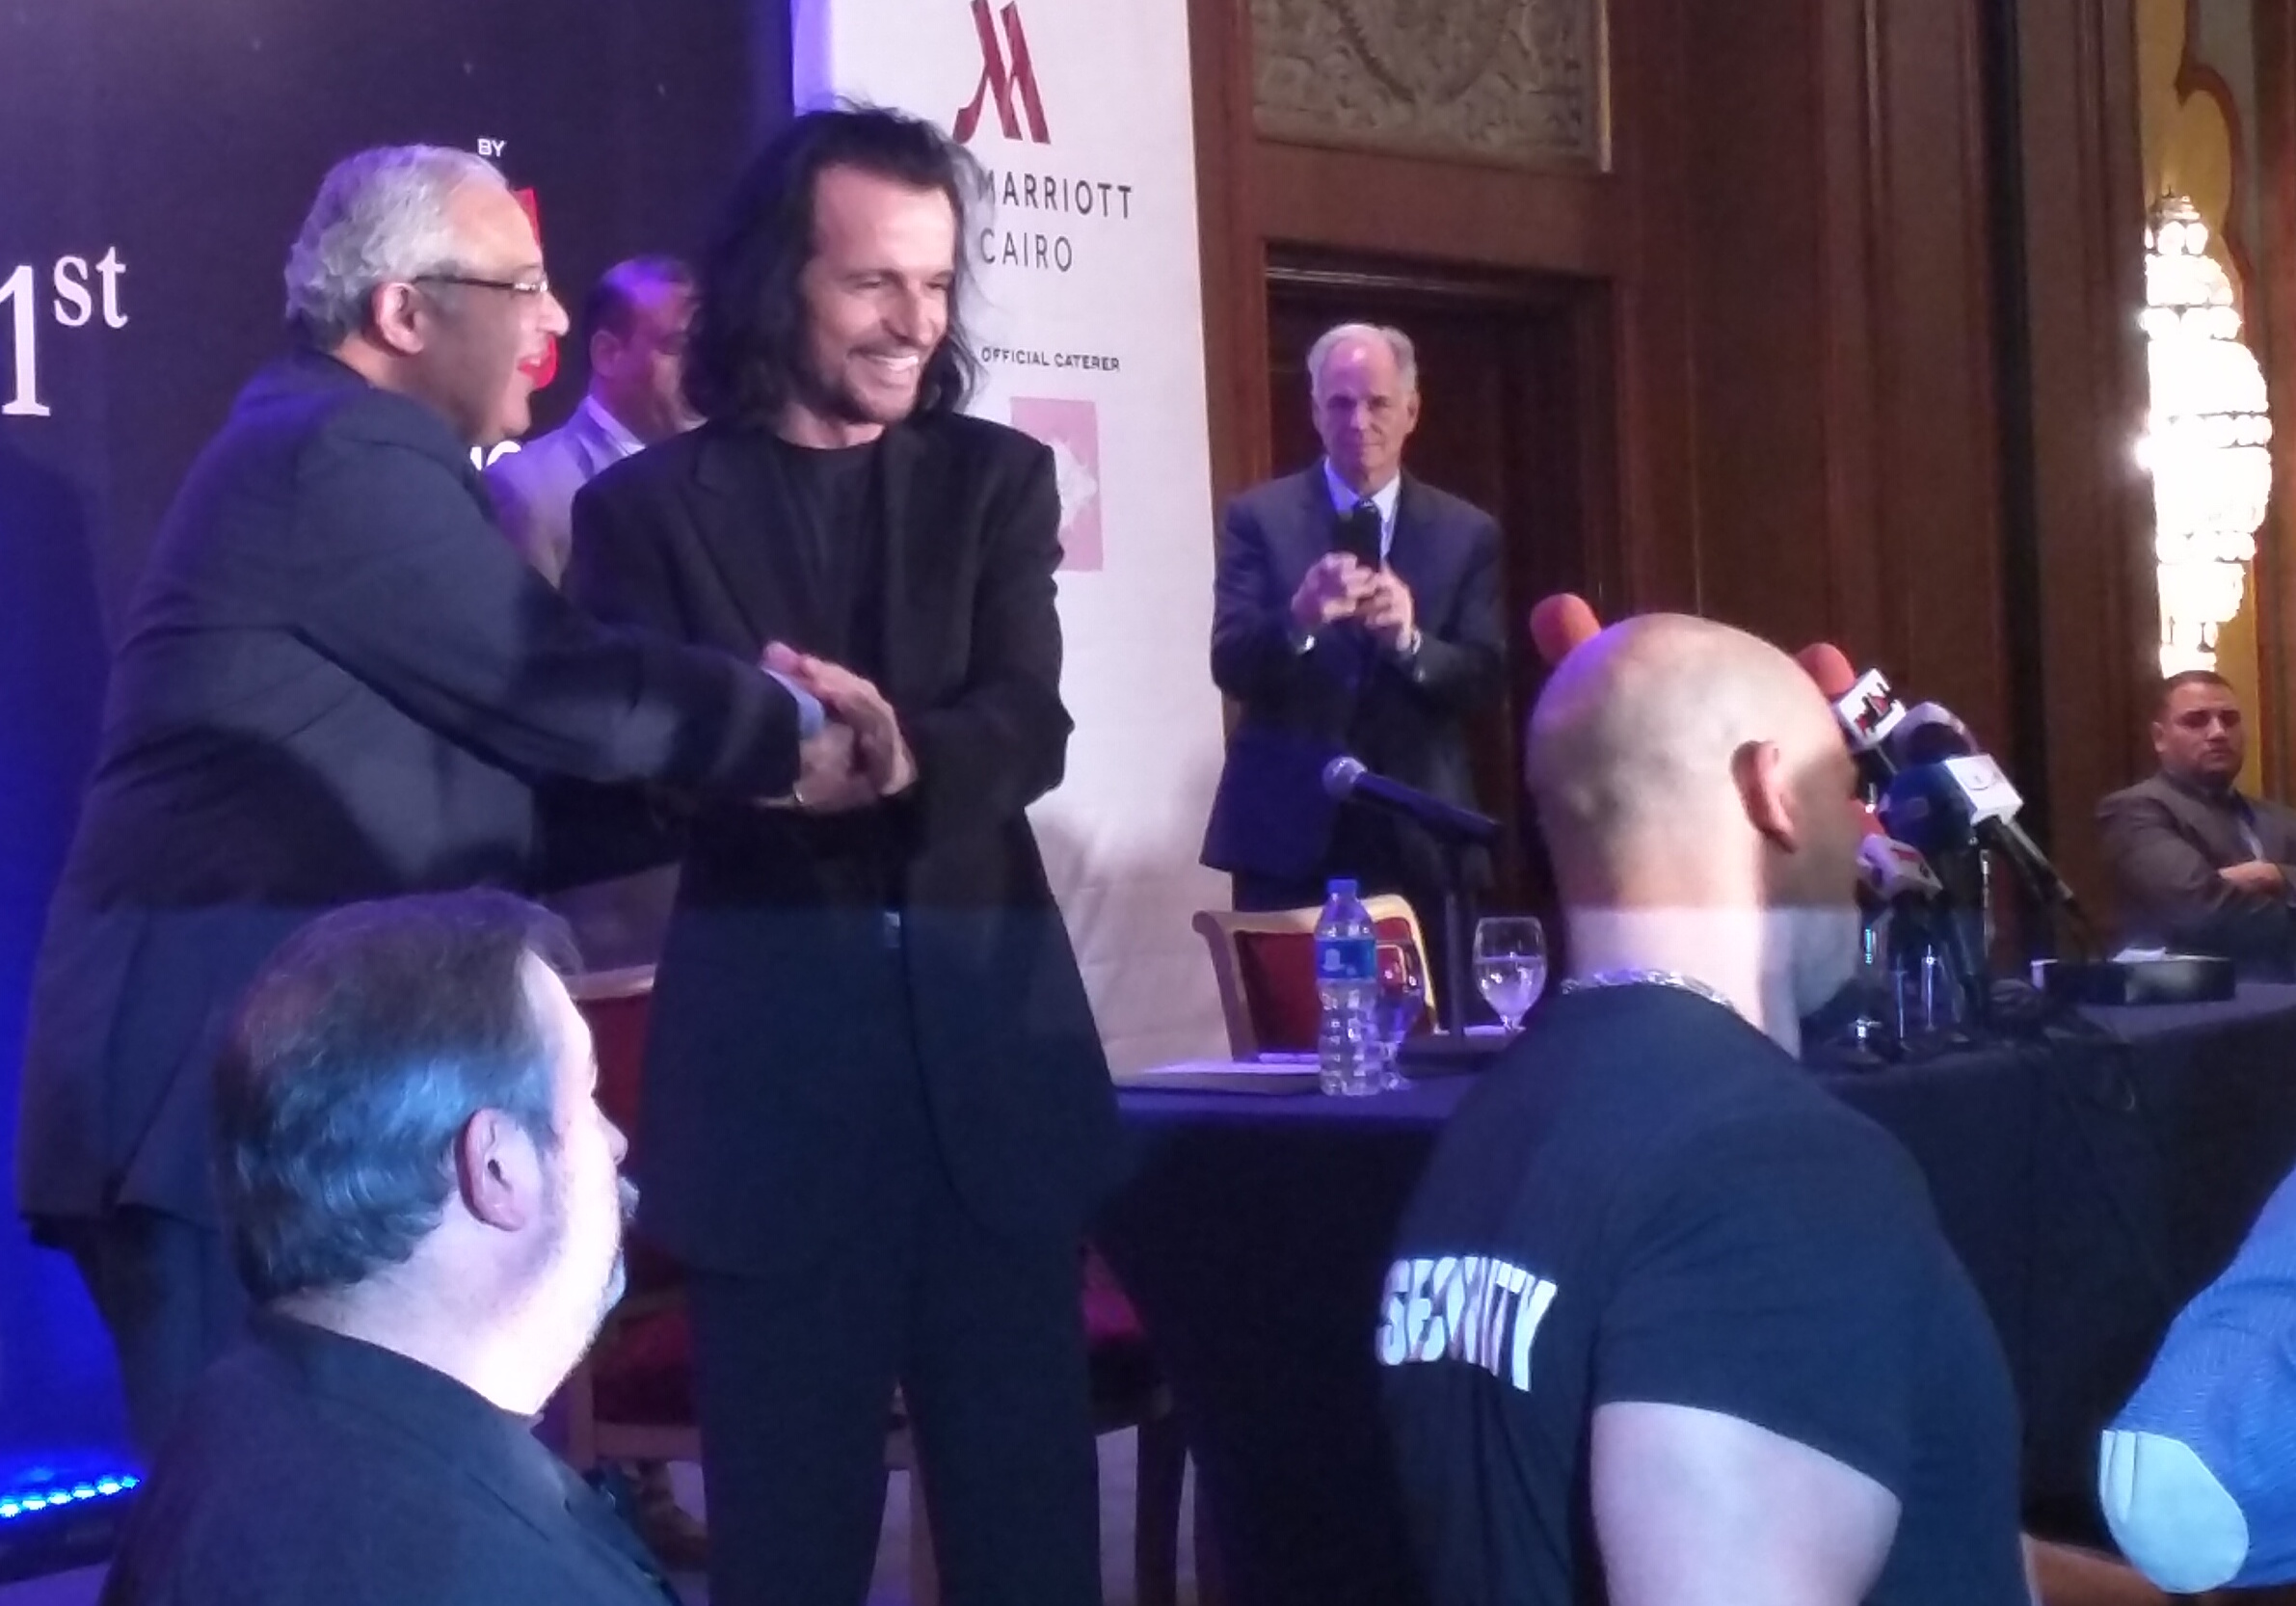 A Foreigner's Experience At The Yanni Press Conference